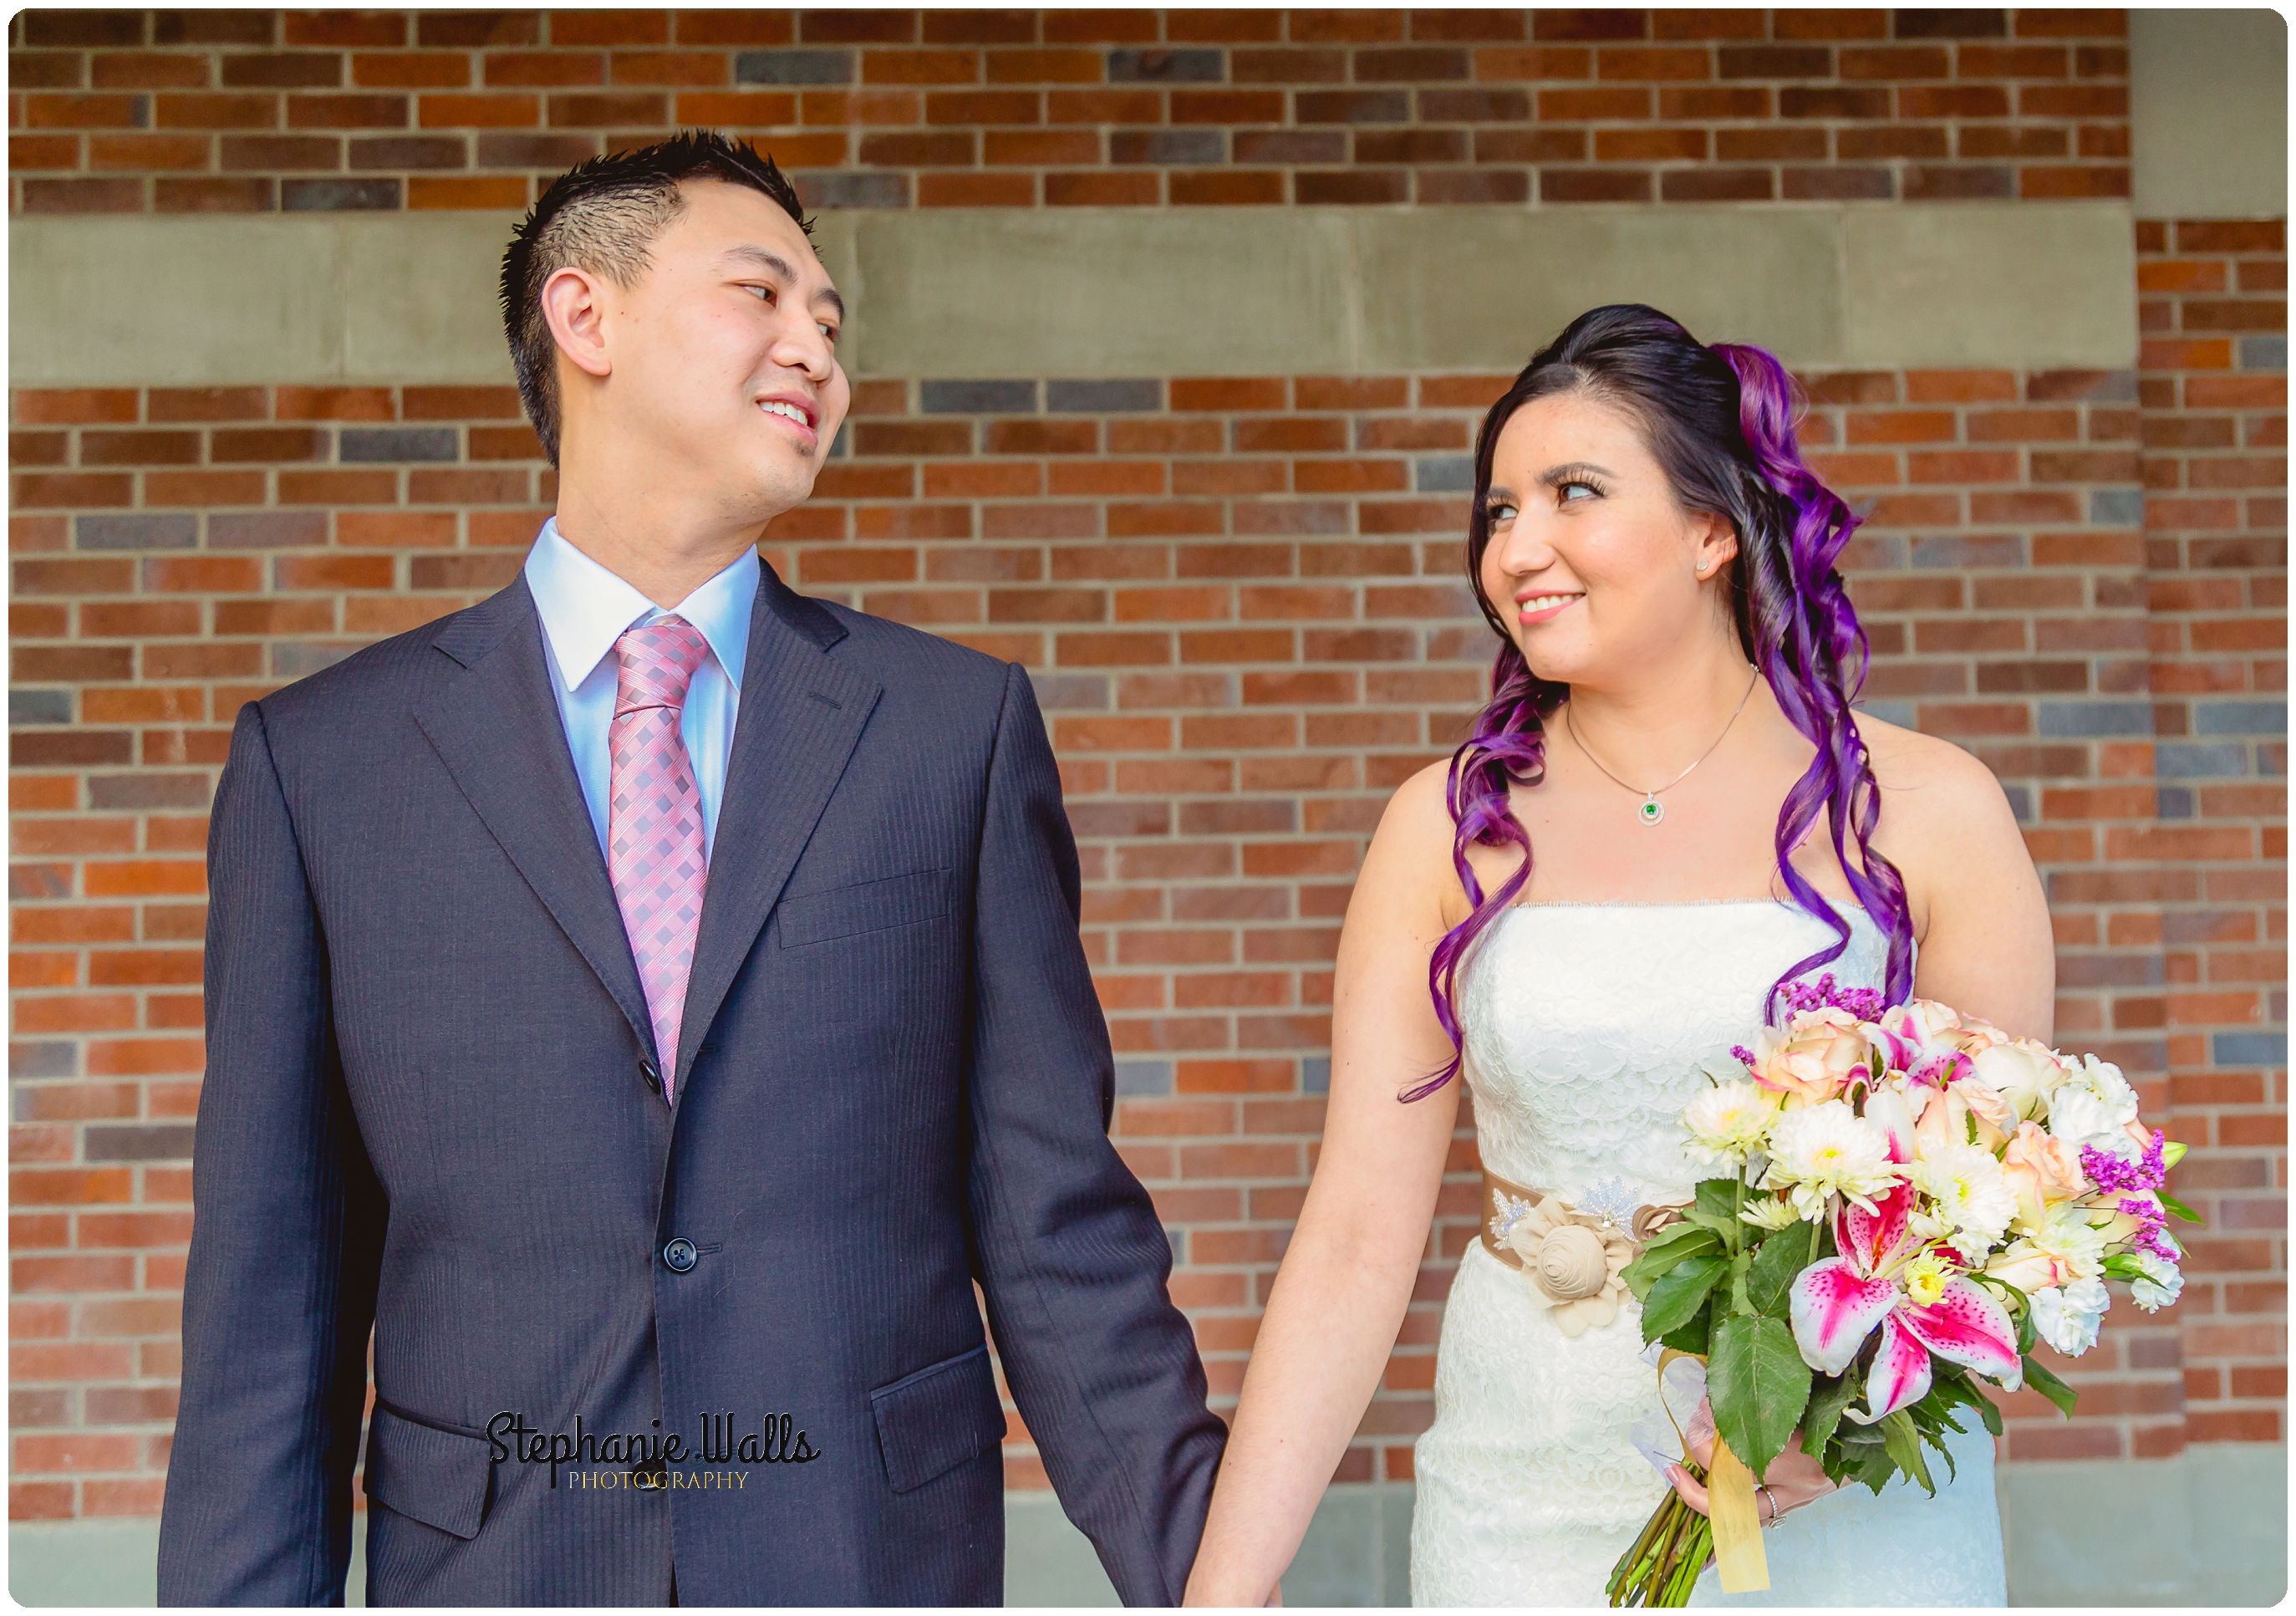 Chan Wedding 016 LAUGHTER AND LACE | BOTHELL COURTHOUSE WEDDING BOTHELL WA